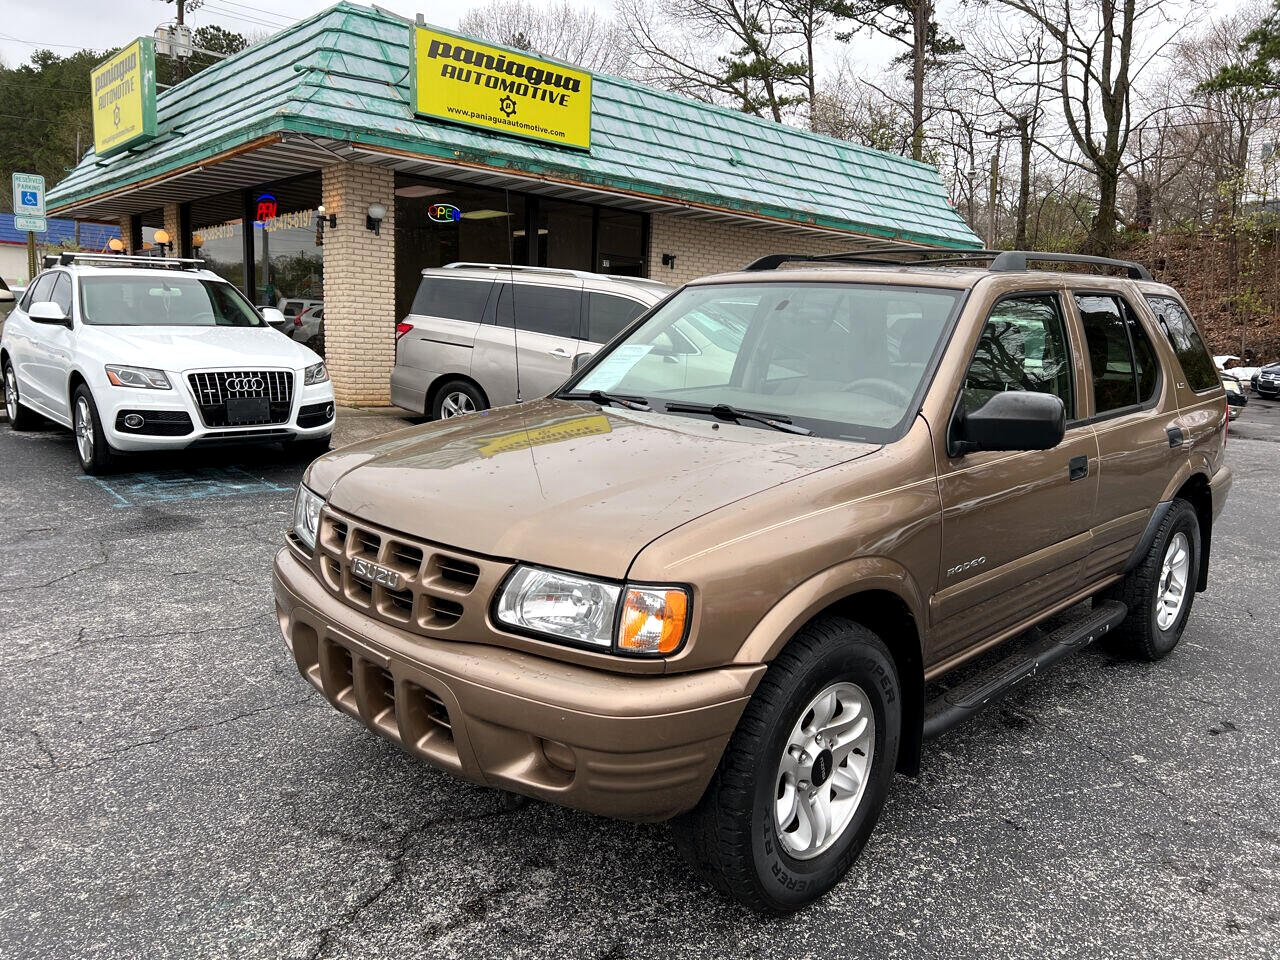 Used 2002 Isuzu Rodeo's nationwide for sale - MotorCloud